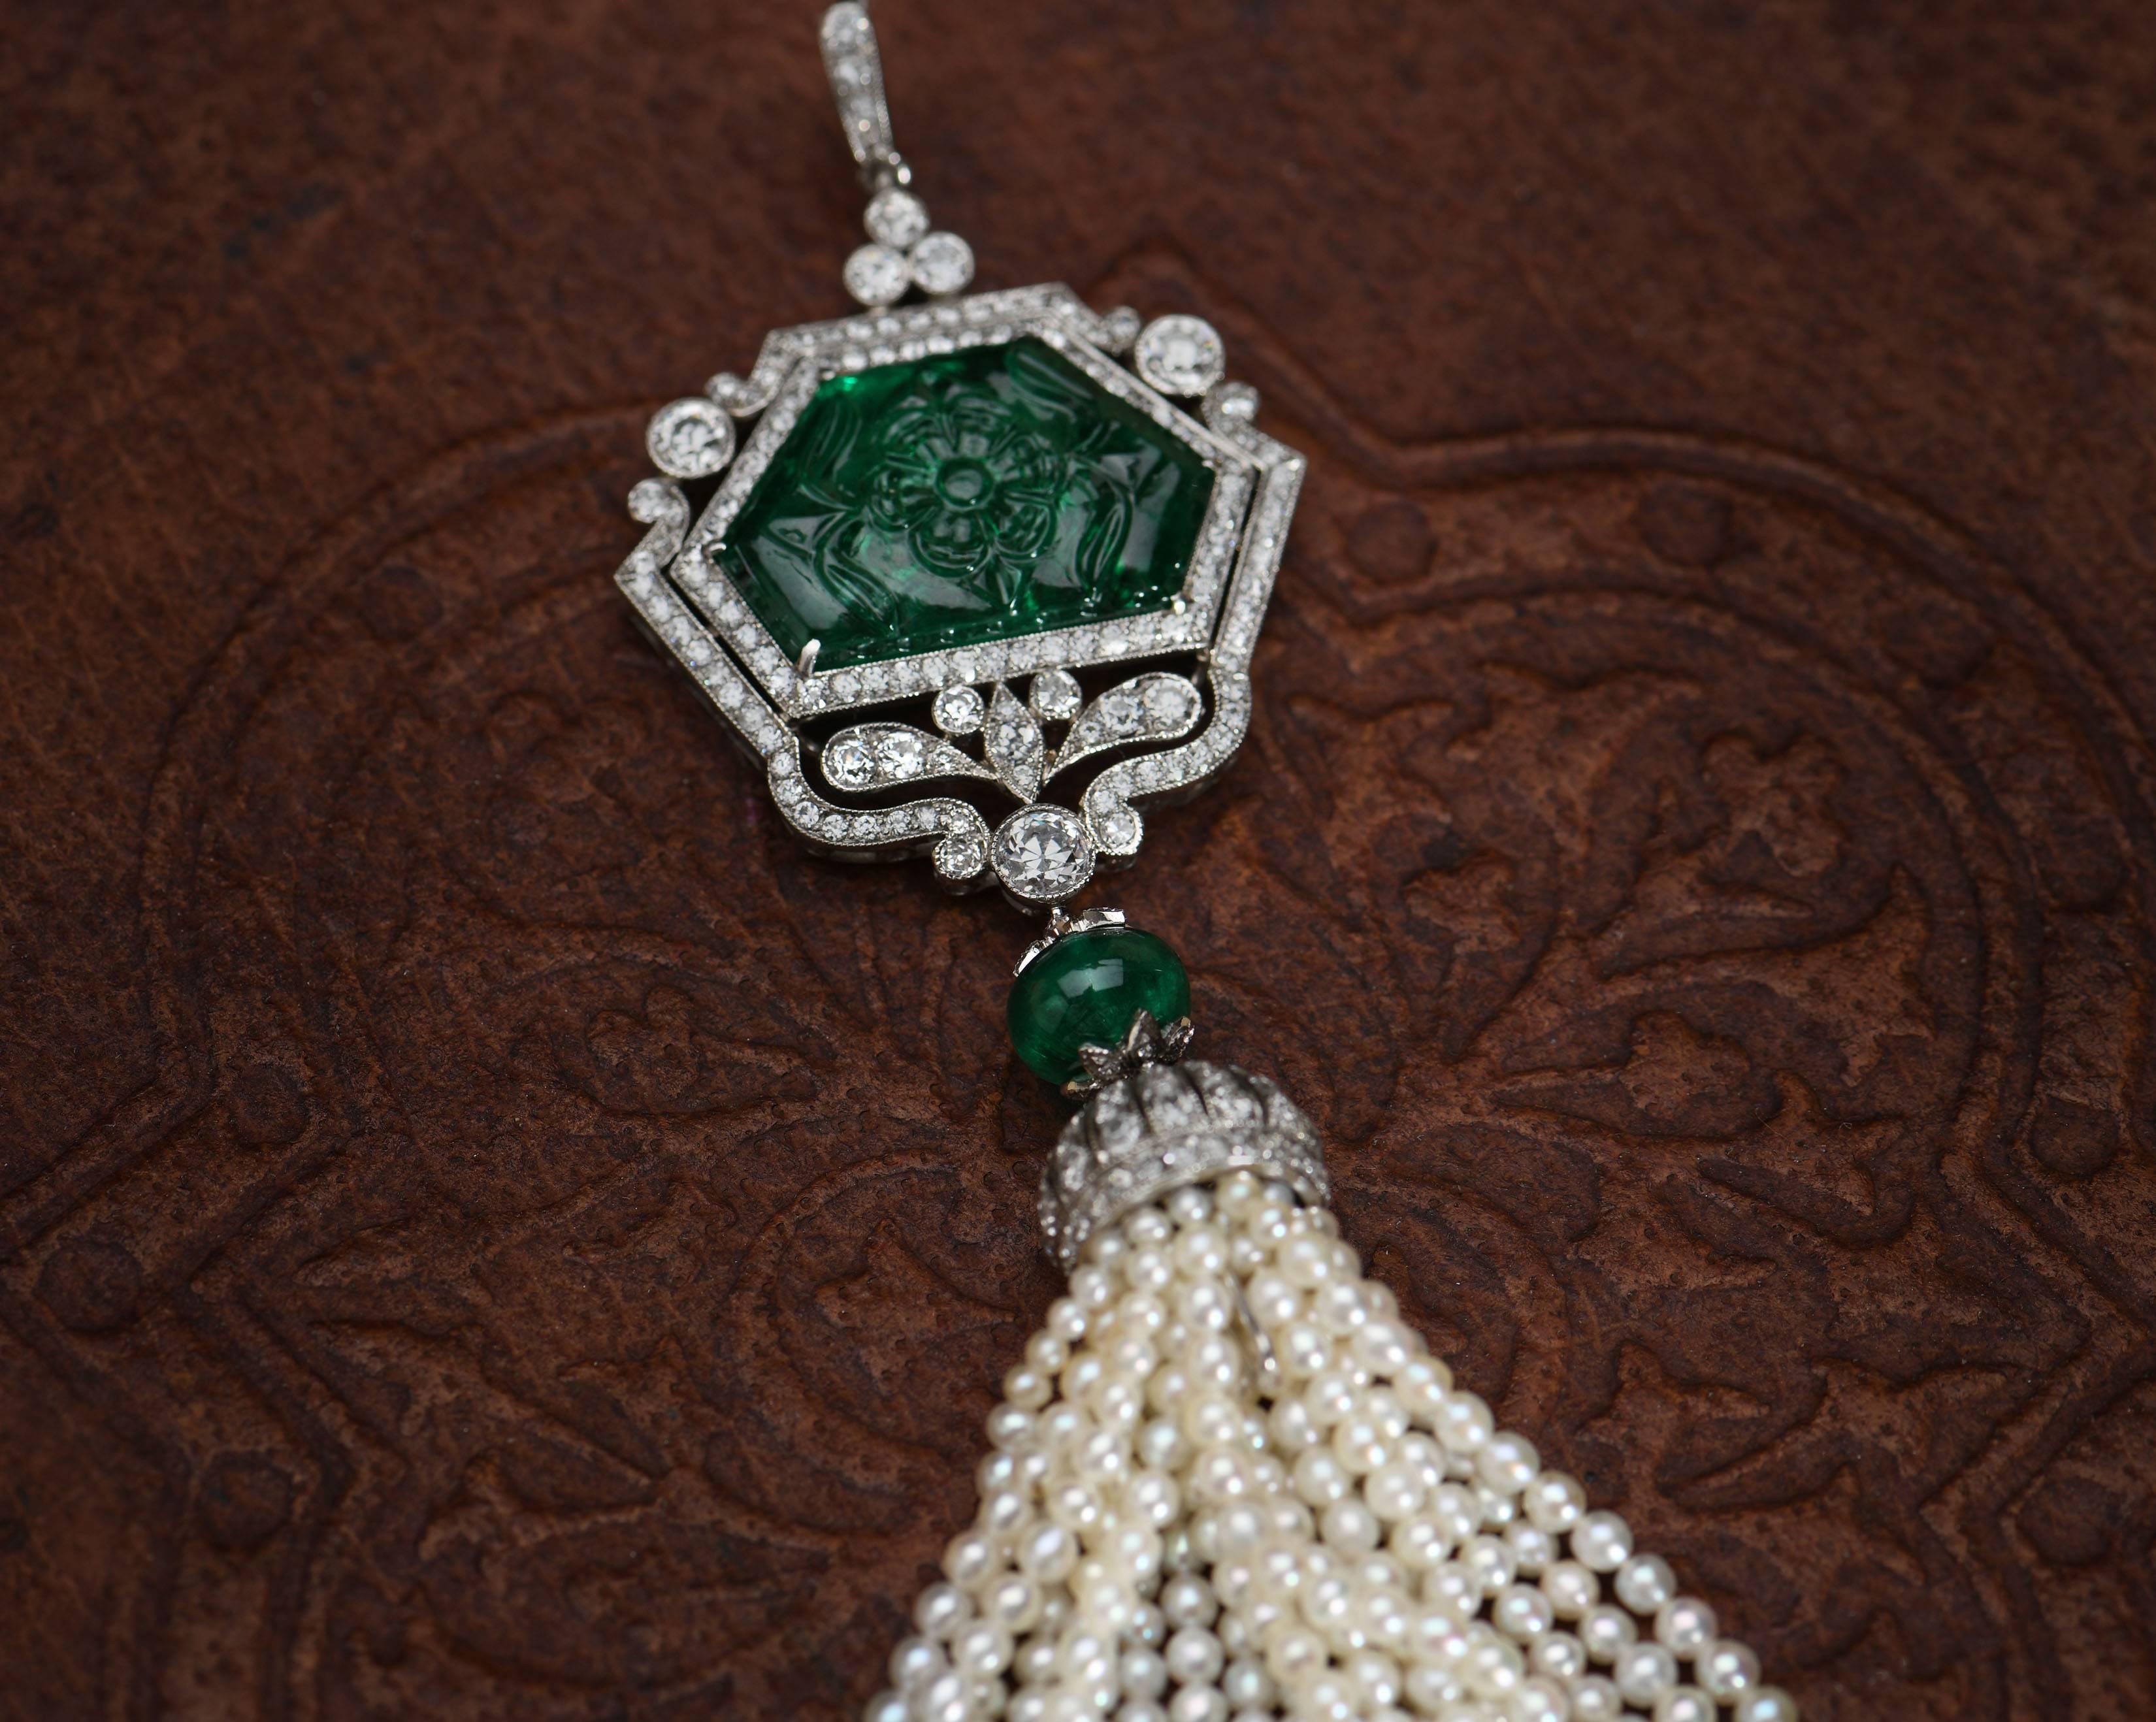 A wonderful, stunning head-turner. This pendant has it all with a big beautiful stone, fine craftsmanship and fantastic design.

The main focus of the piece is the magnificent carved emerald surrounded by diamond encrusted platinum in an Art Deco